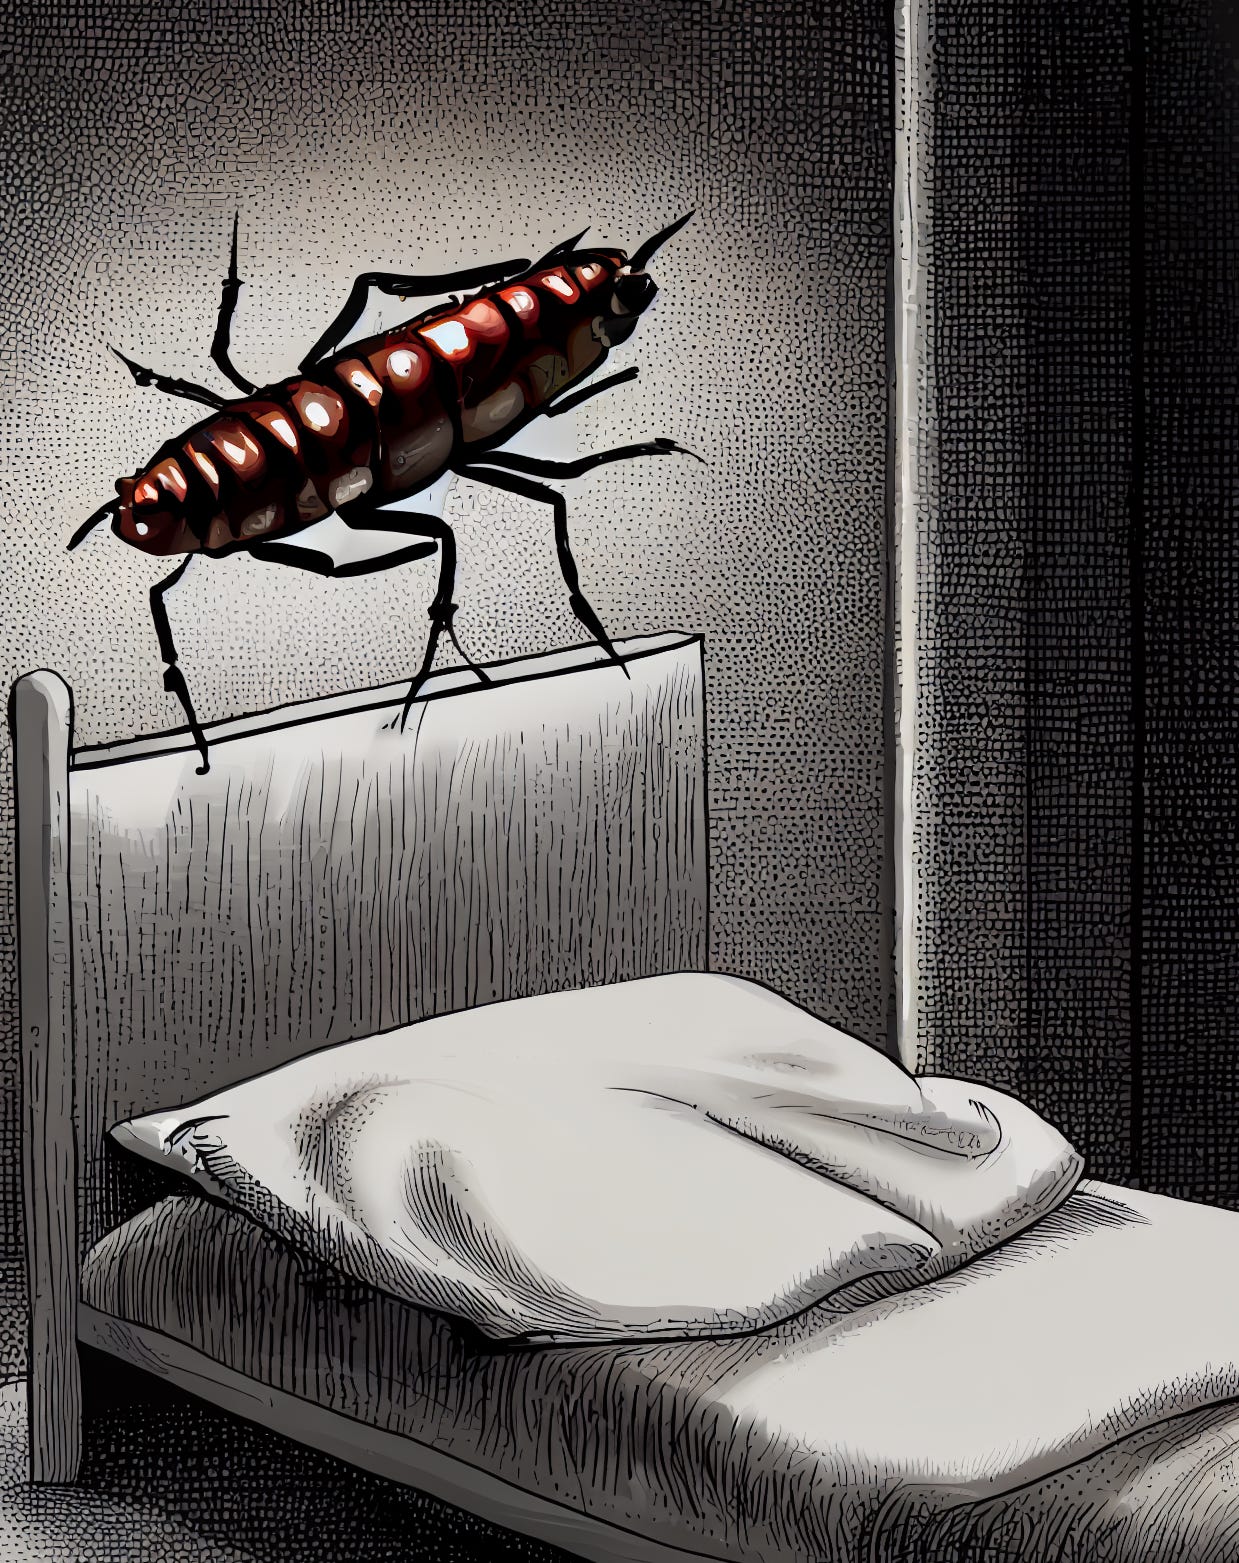 A giant cockroach over a bed